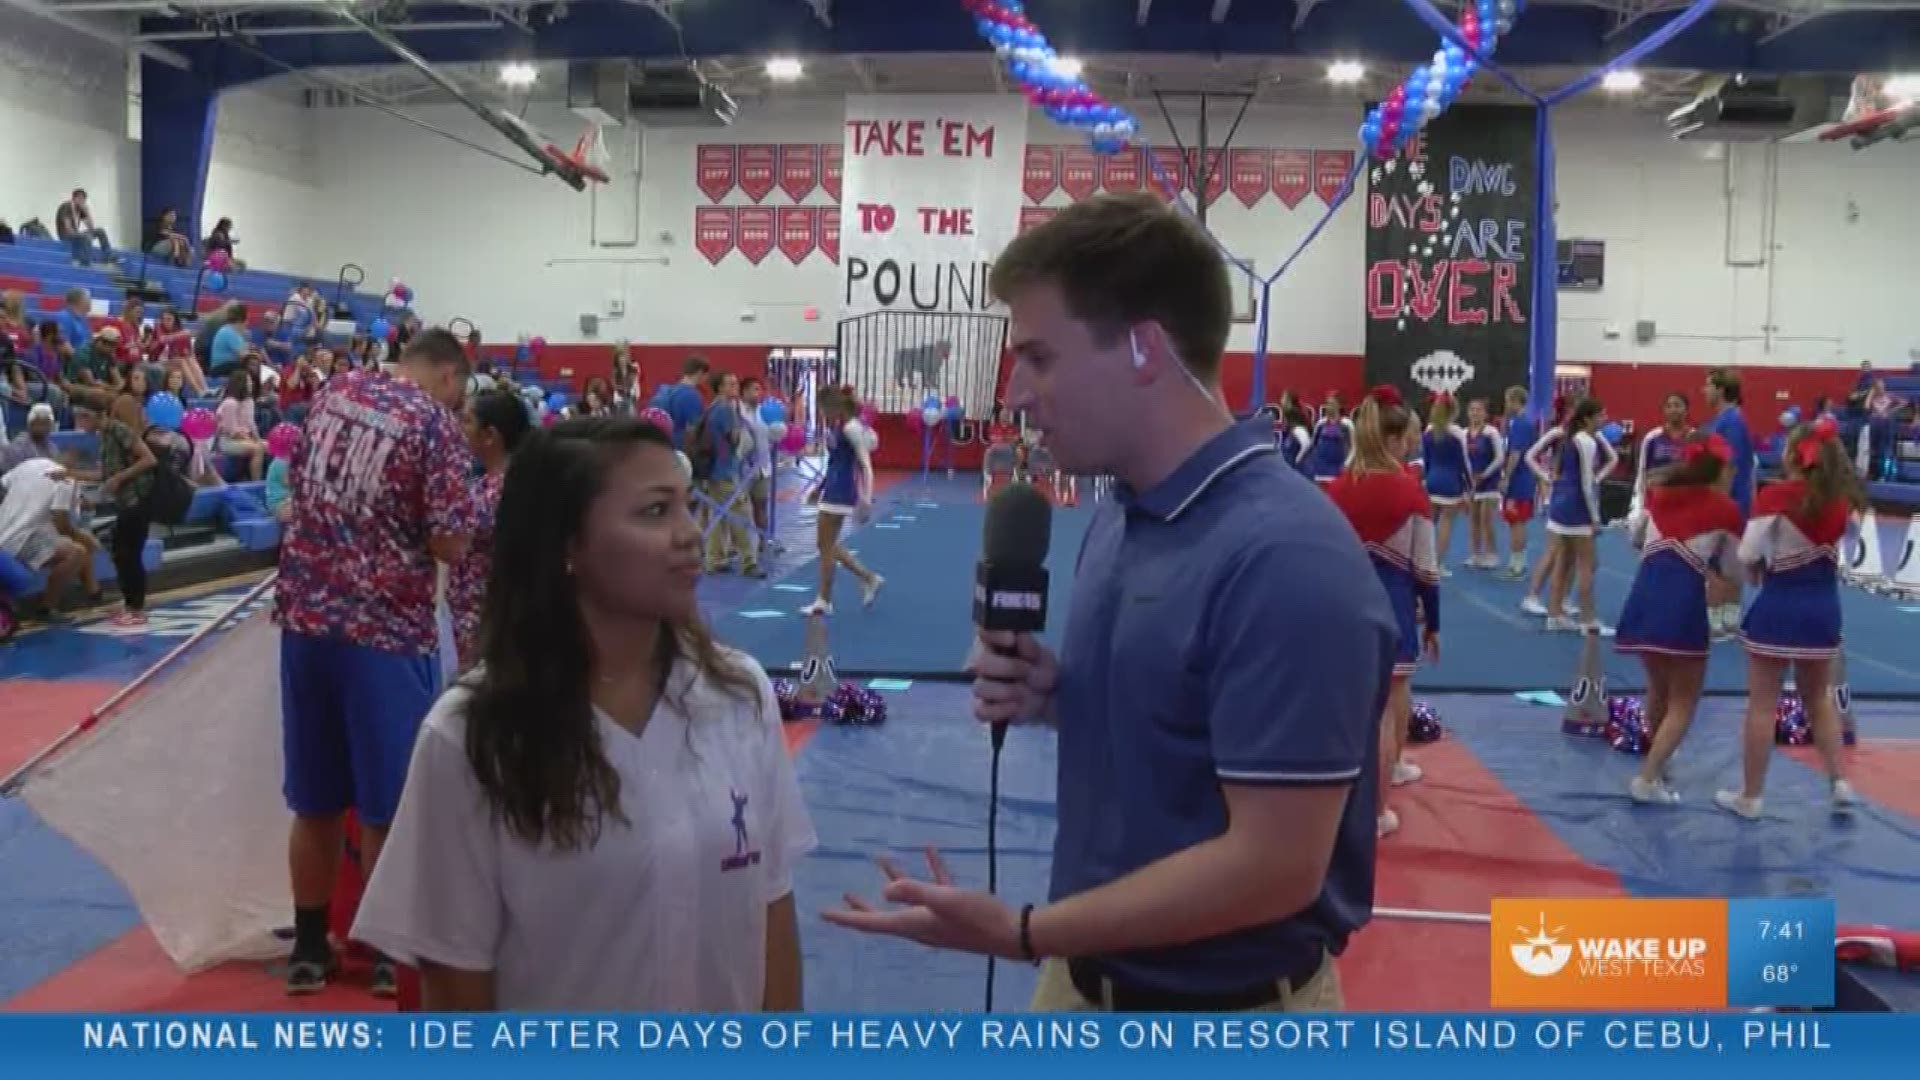 Our Mitchel Summers was live at the Cooper Pep Rally interviewing Cougarette Samantha Tolentino.